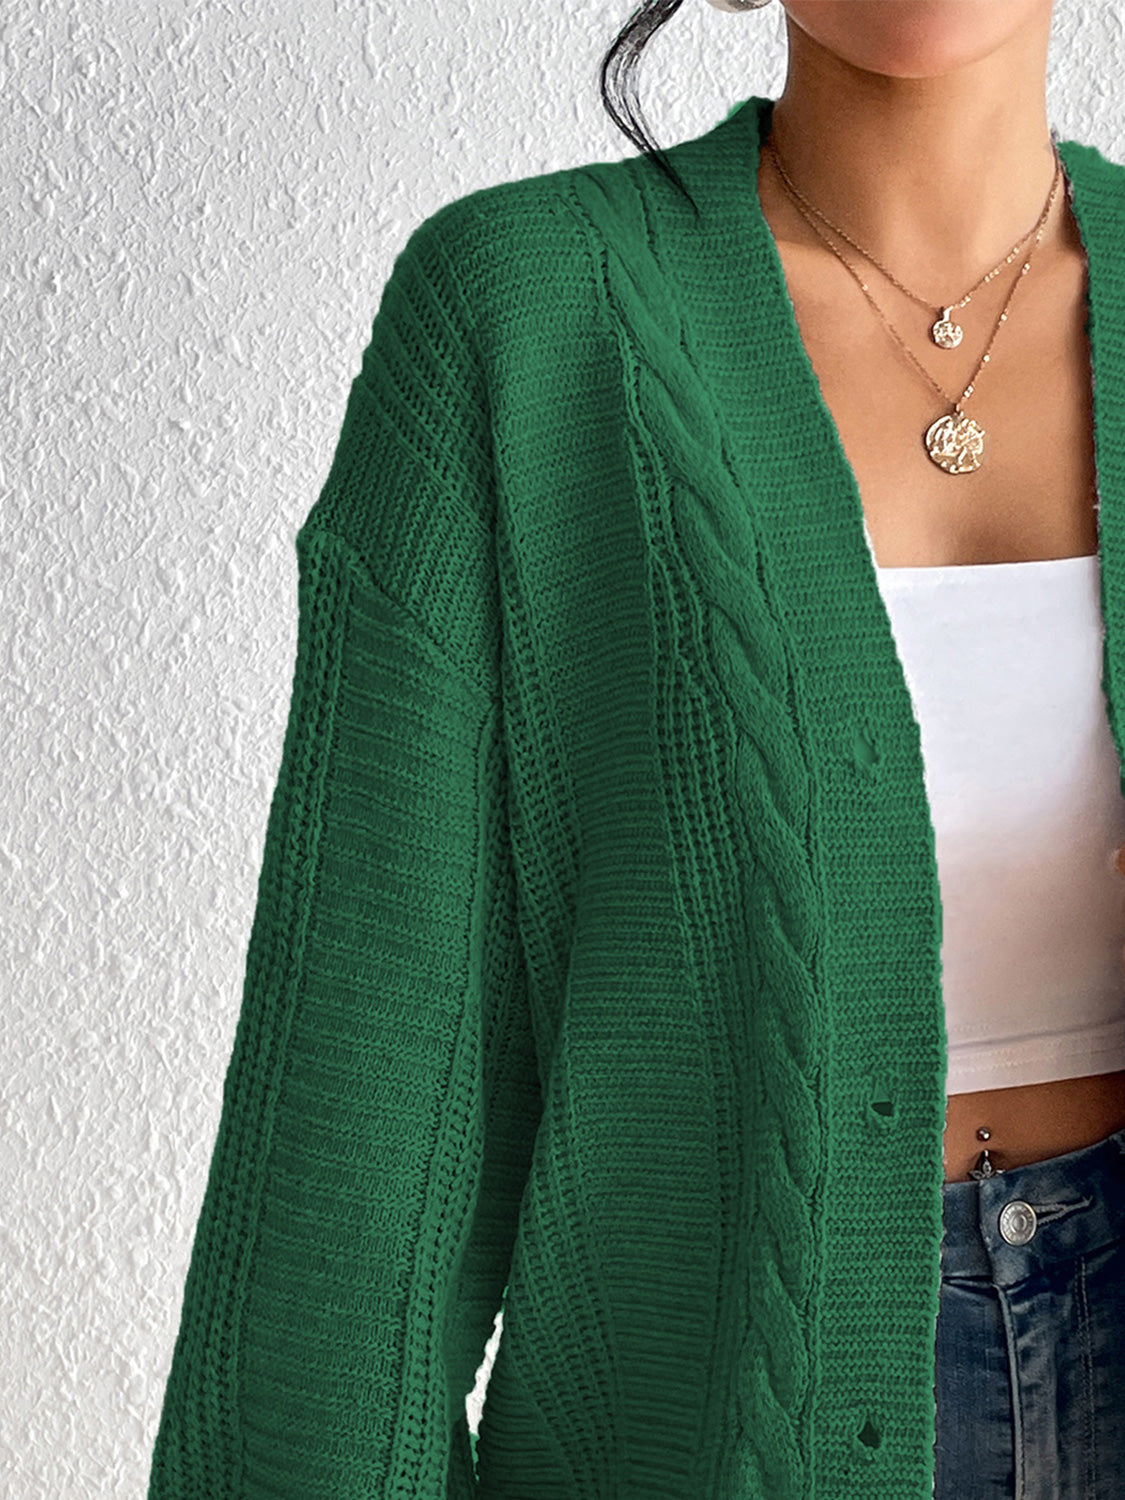 Cable-Knit Button Down Cardigan - Women’s Clothing & Accessories - Shirts & Tops - 17 - 2024